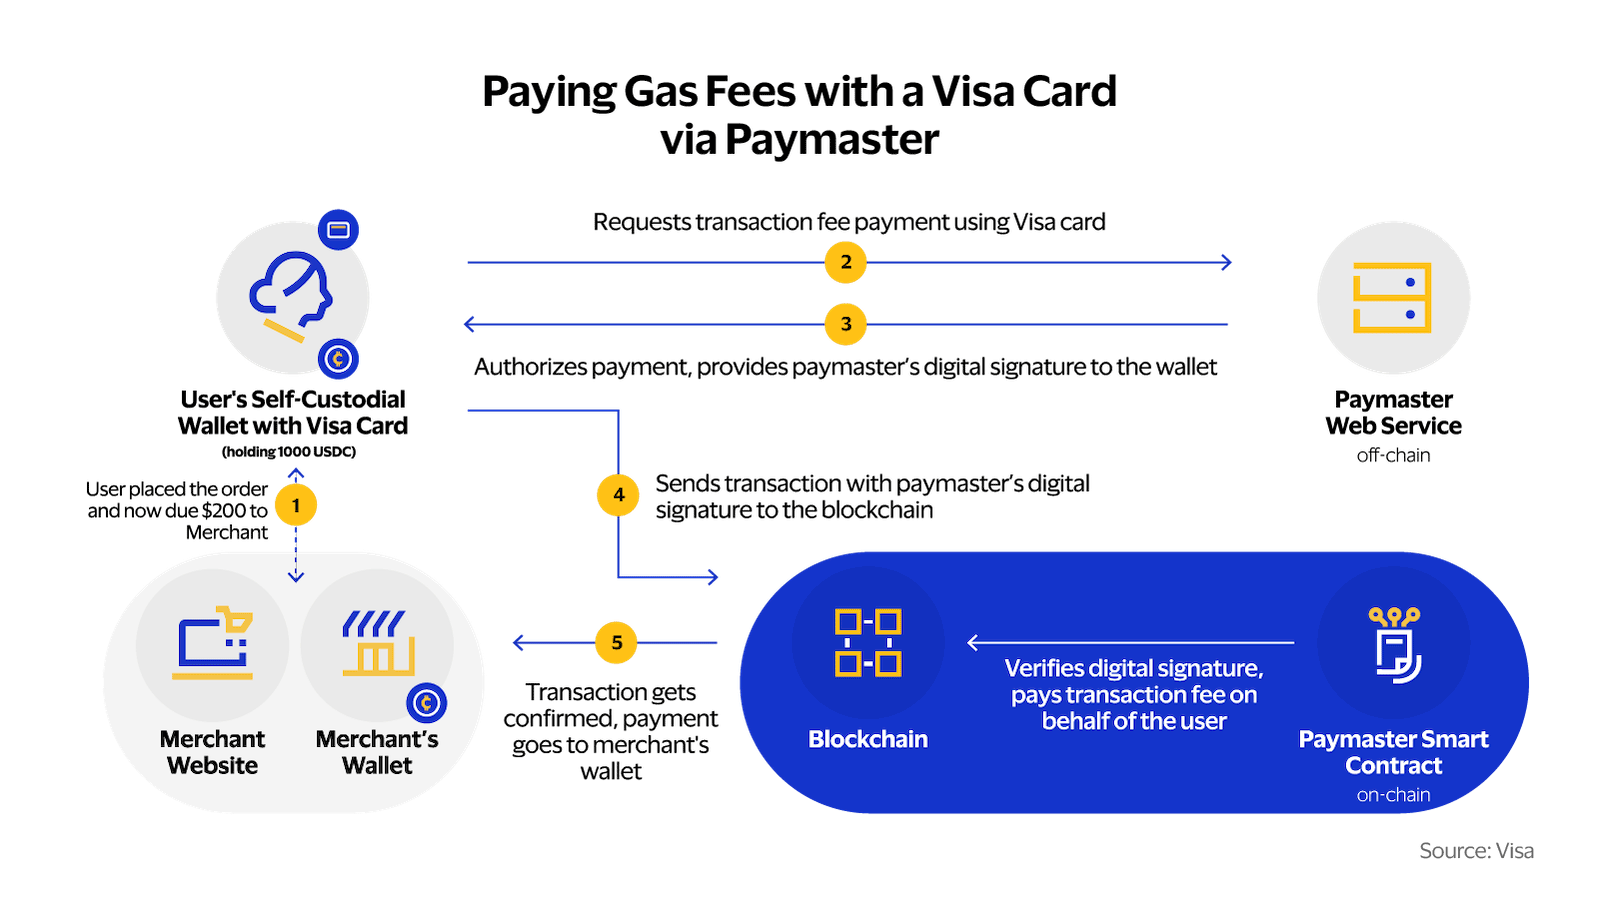 Technological Workflow of Transactions using a Paymaster and Visa Card. See image description for details.